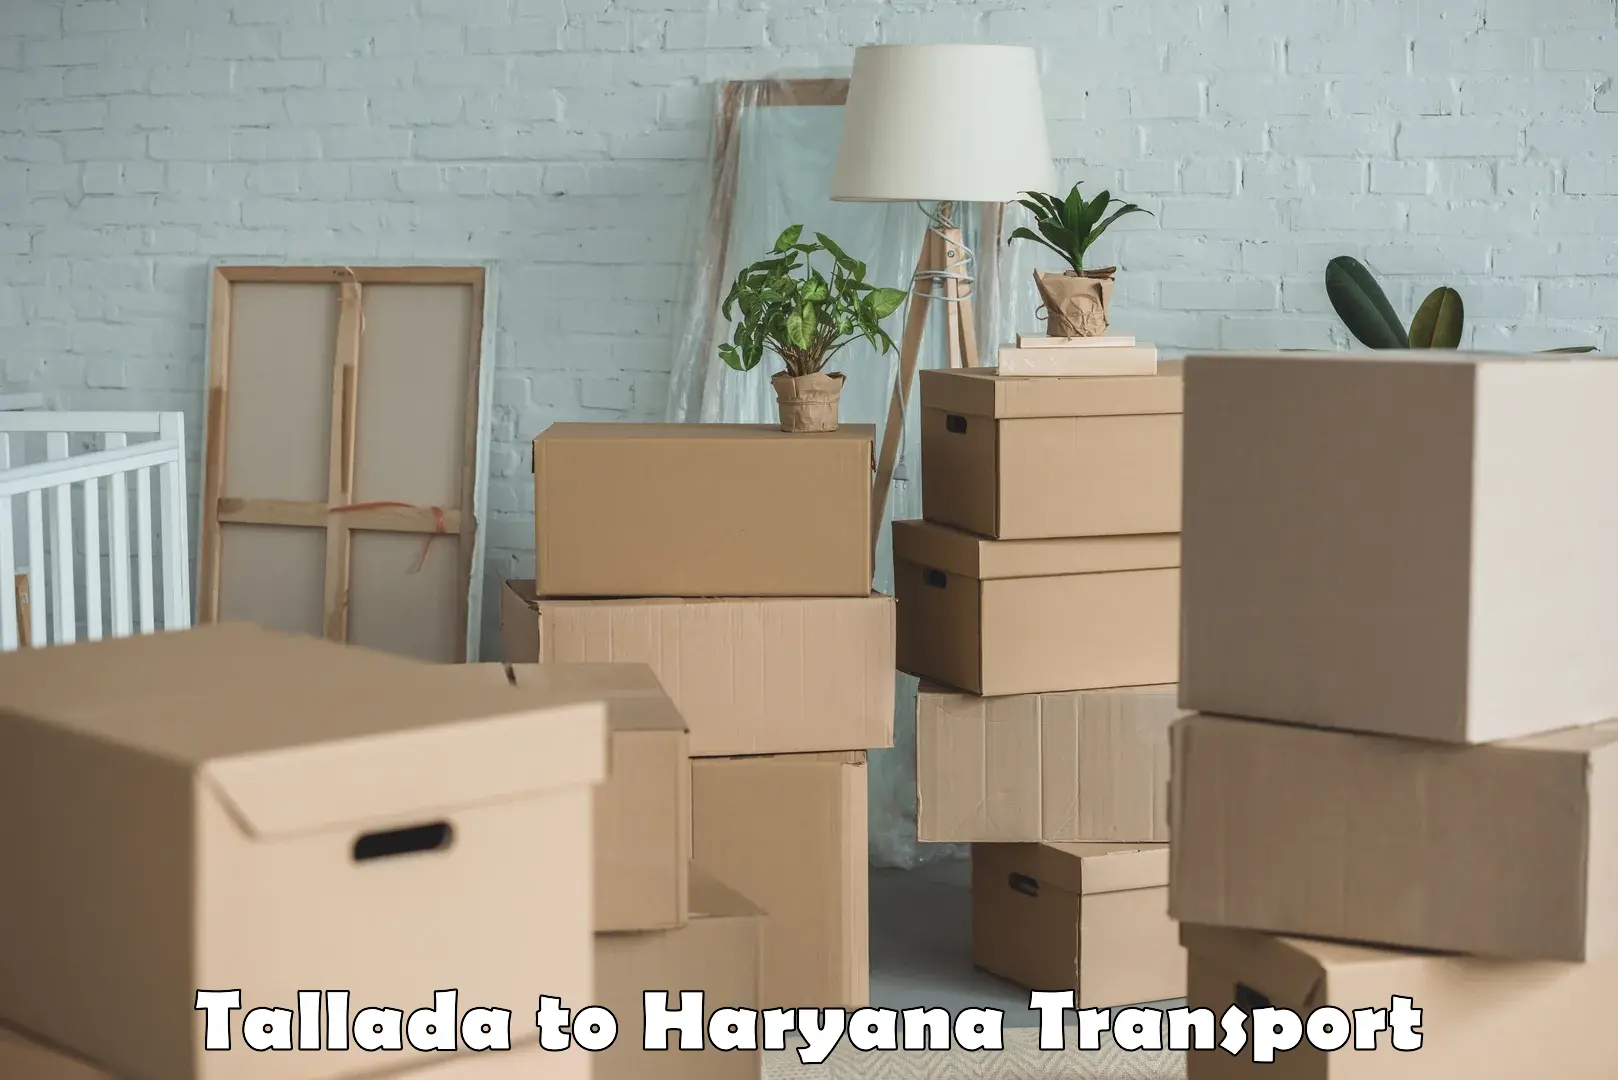 India truck logistics services in Tallada to NCR Haryana